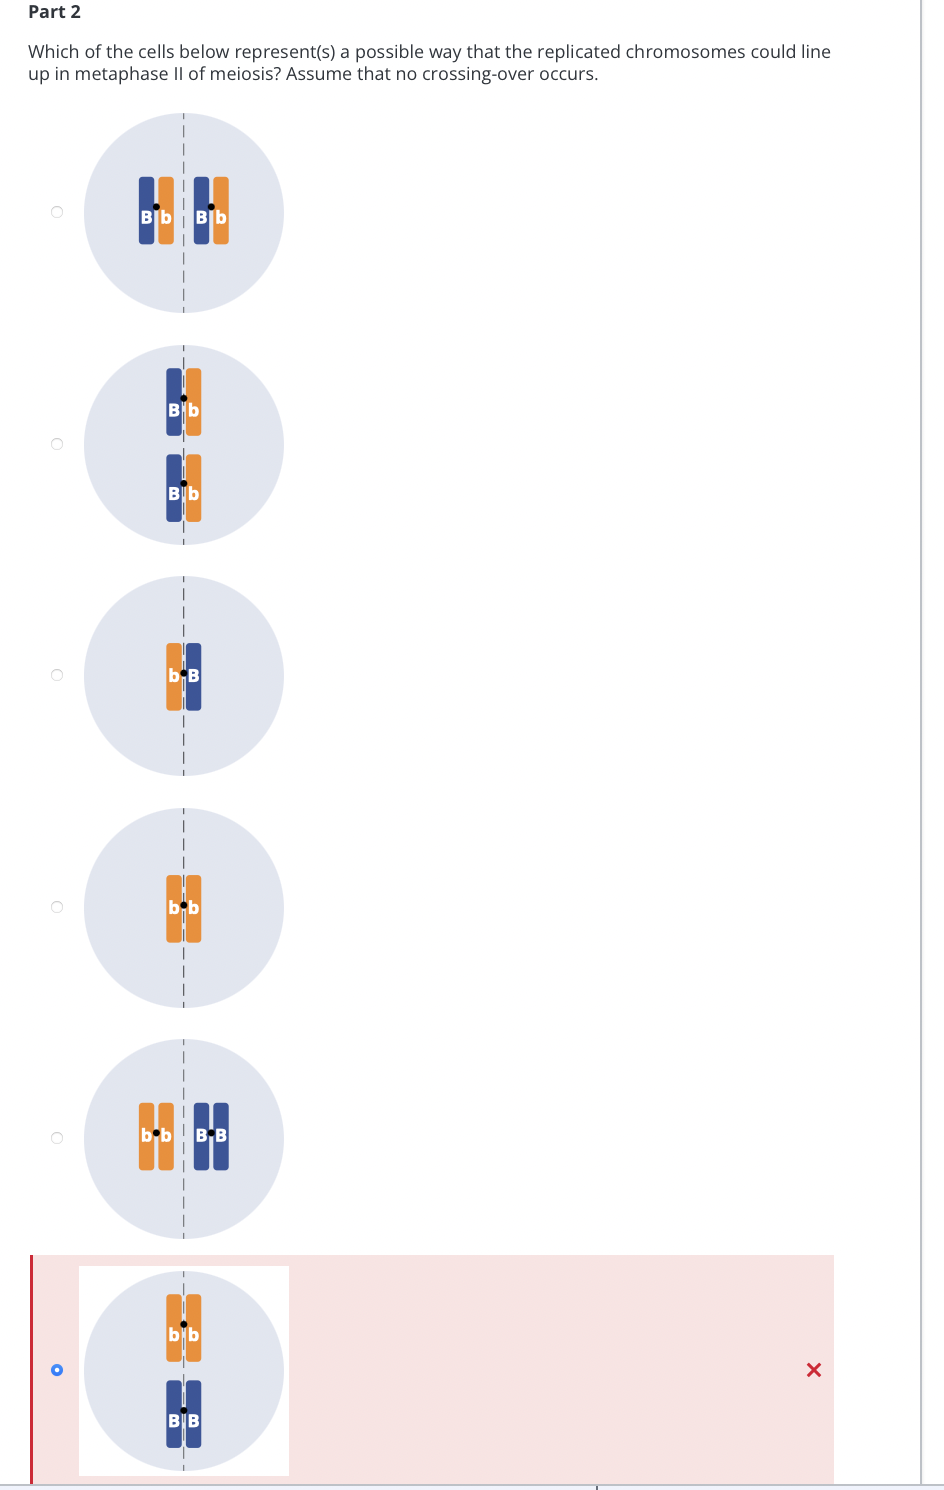 Part 2
Which of the cells below represent(s) a possible way that the replicated chromosomes could line
up in metaphase Il of meiosis? Assume that no crossing-over occurs.
ВЬ ВЬ
Bib
ВІЬ
b,B
S
bь! В в
b b
BB
X